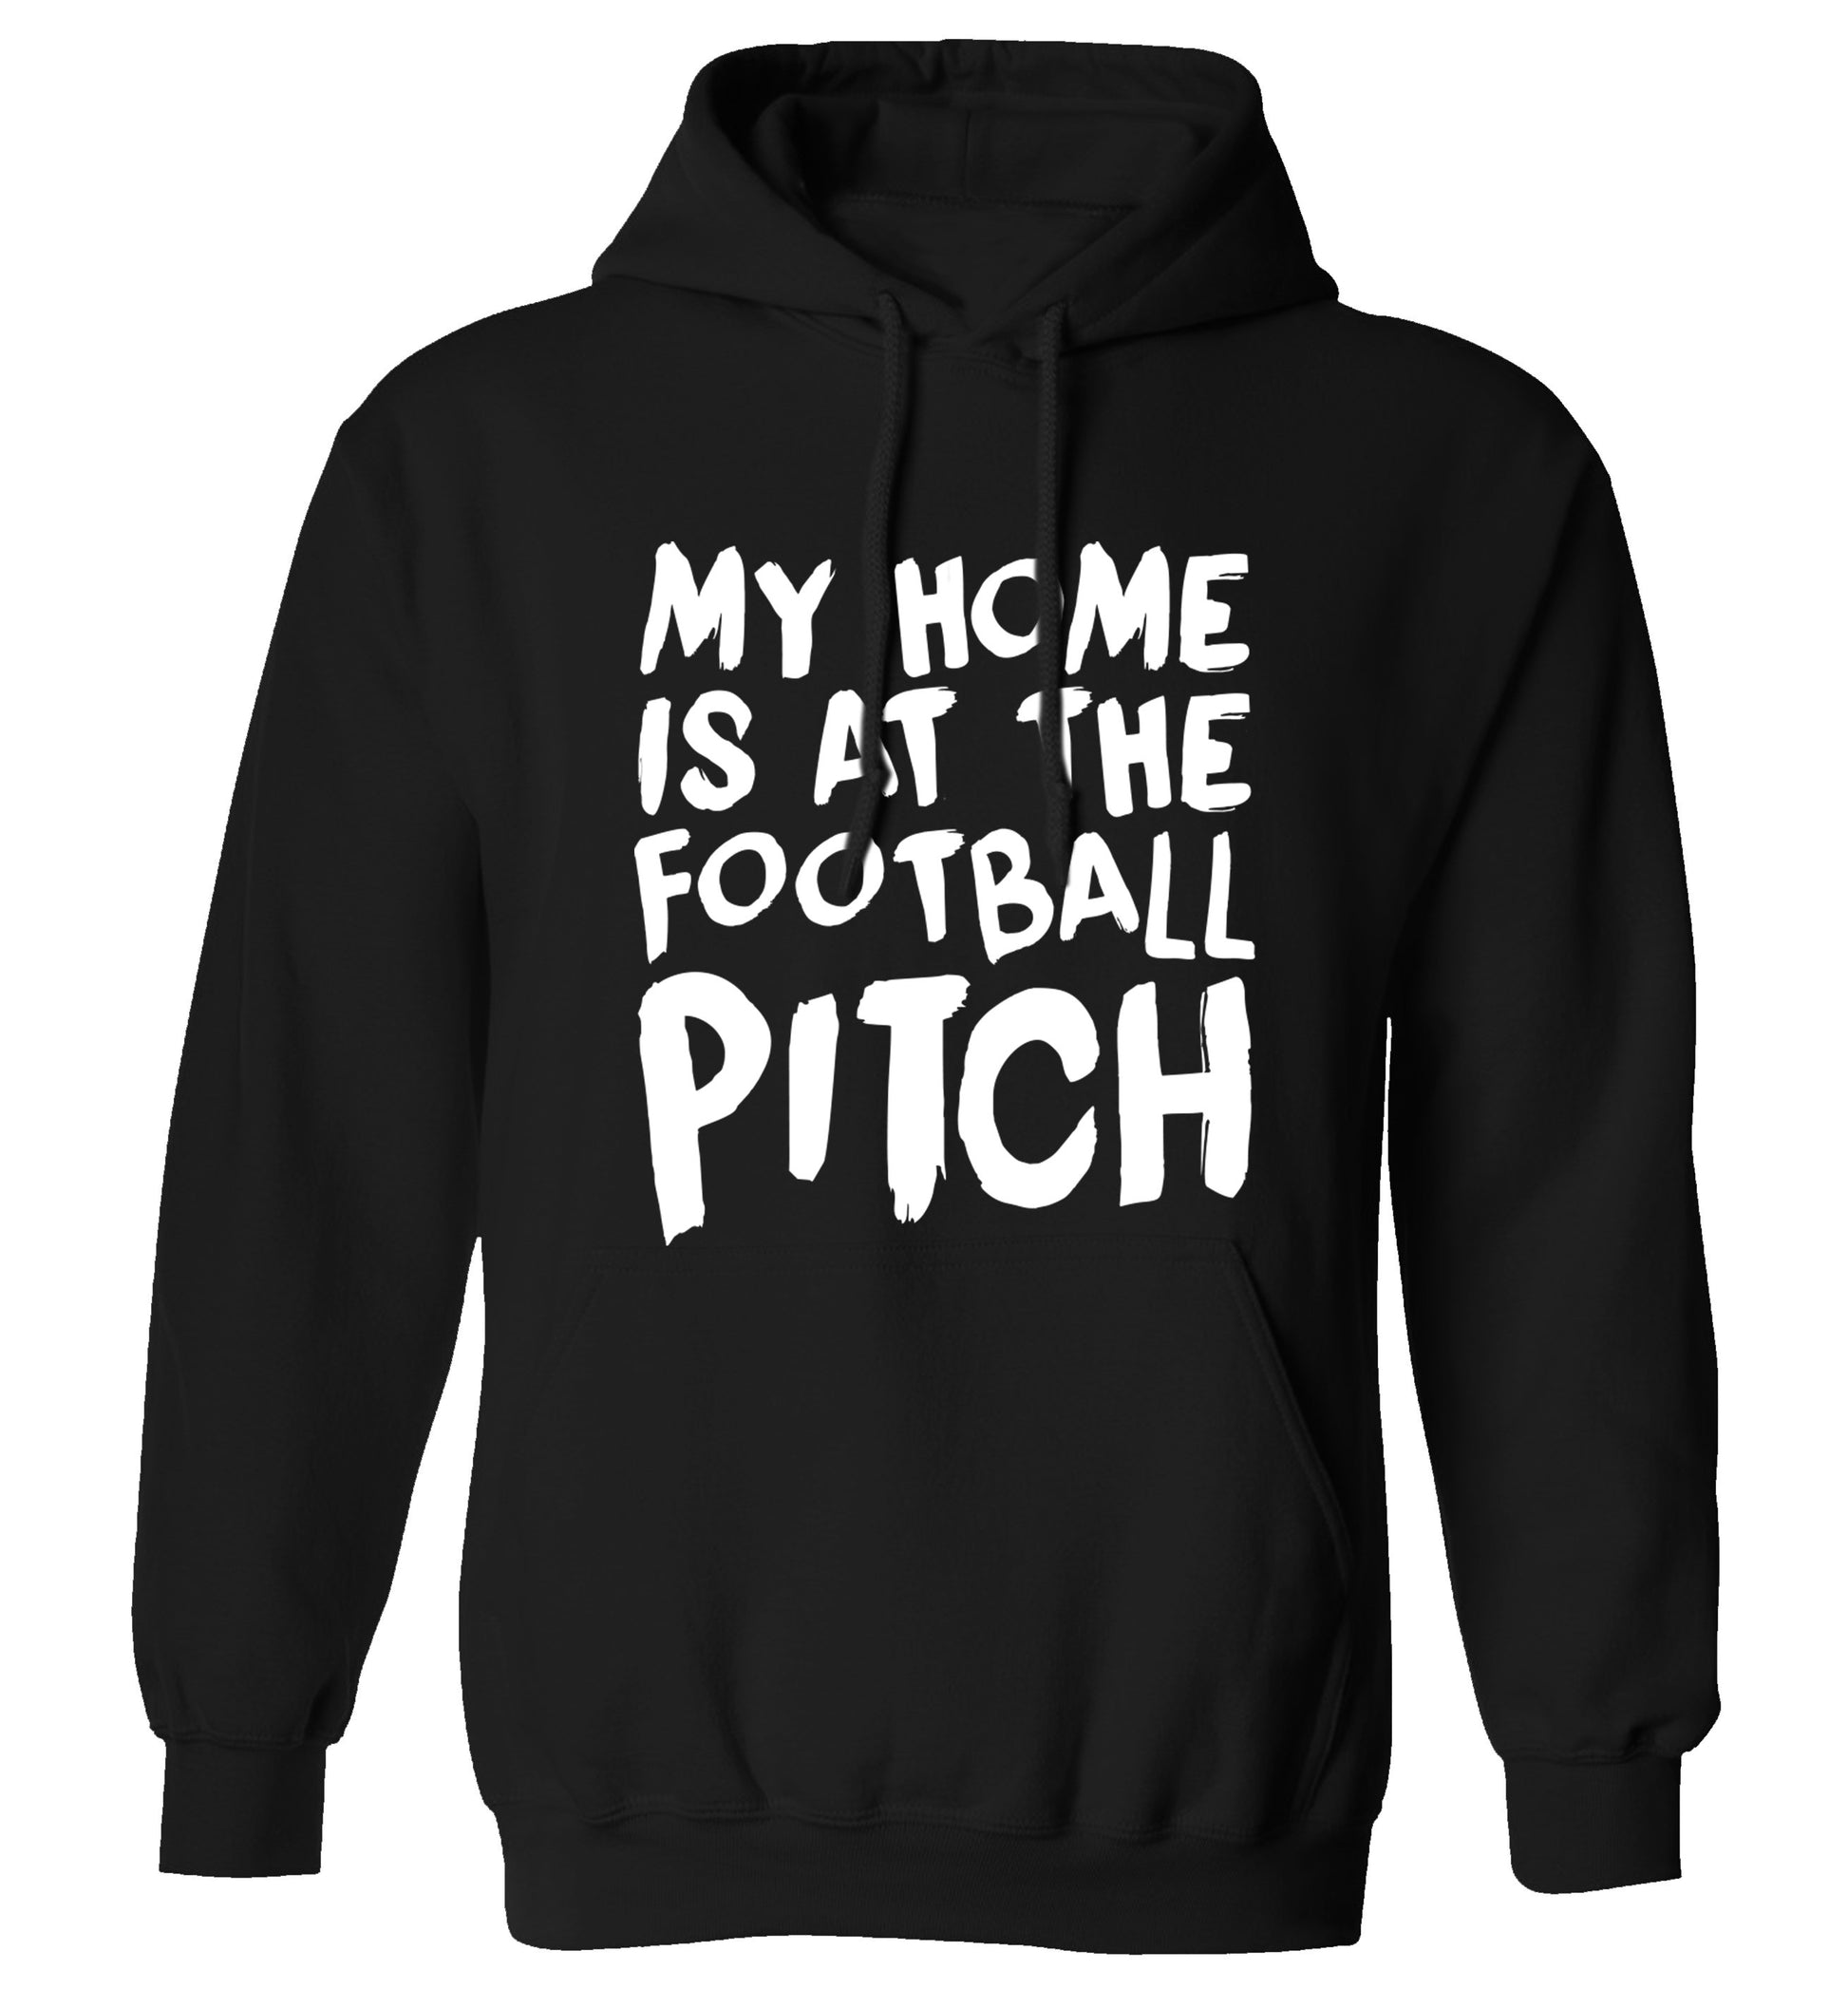 My home is at the football pitch adults unisex black hoodie 2XL